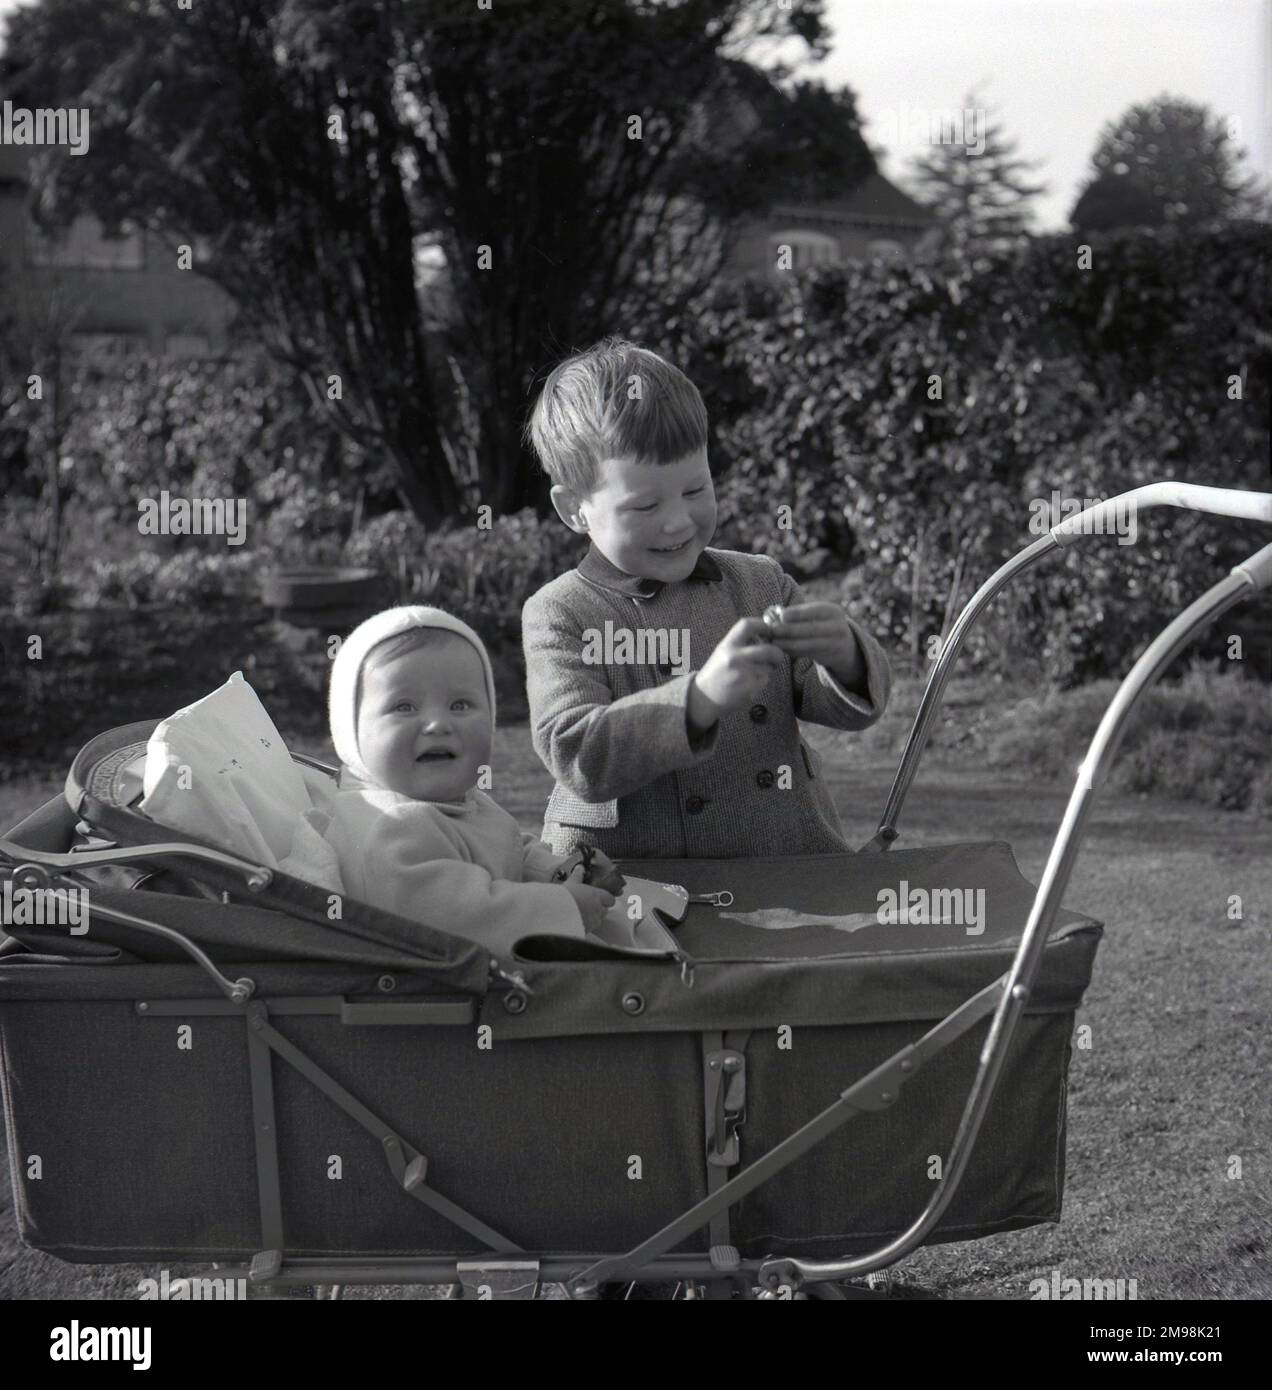 1960s, historical, outside in a garden, a young boy standing beside his infant brother who, with a cushion behind him, is sitting up in a metal framed pram of the era, England, UK. This type of baby or infant carring carriage was the same design of the traditional four-wheeled coach-built pram, where the child is facing the person pushing the pram, but was a lighter and smaller version, having a frame which meant that that it folded down when not in use. Stock Photo